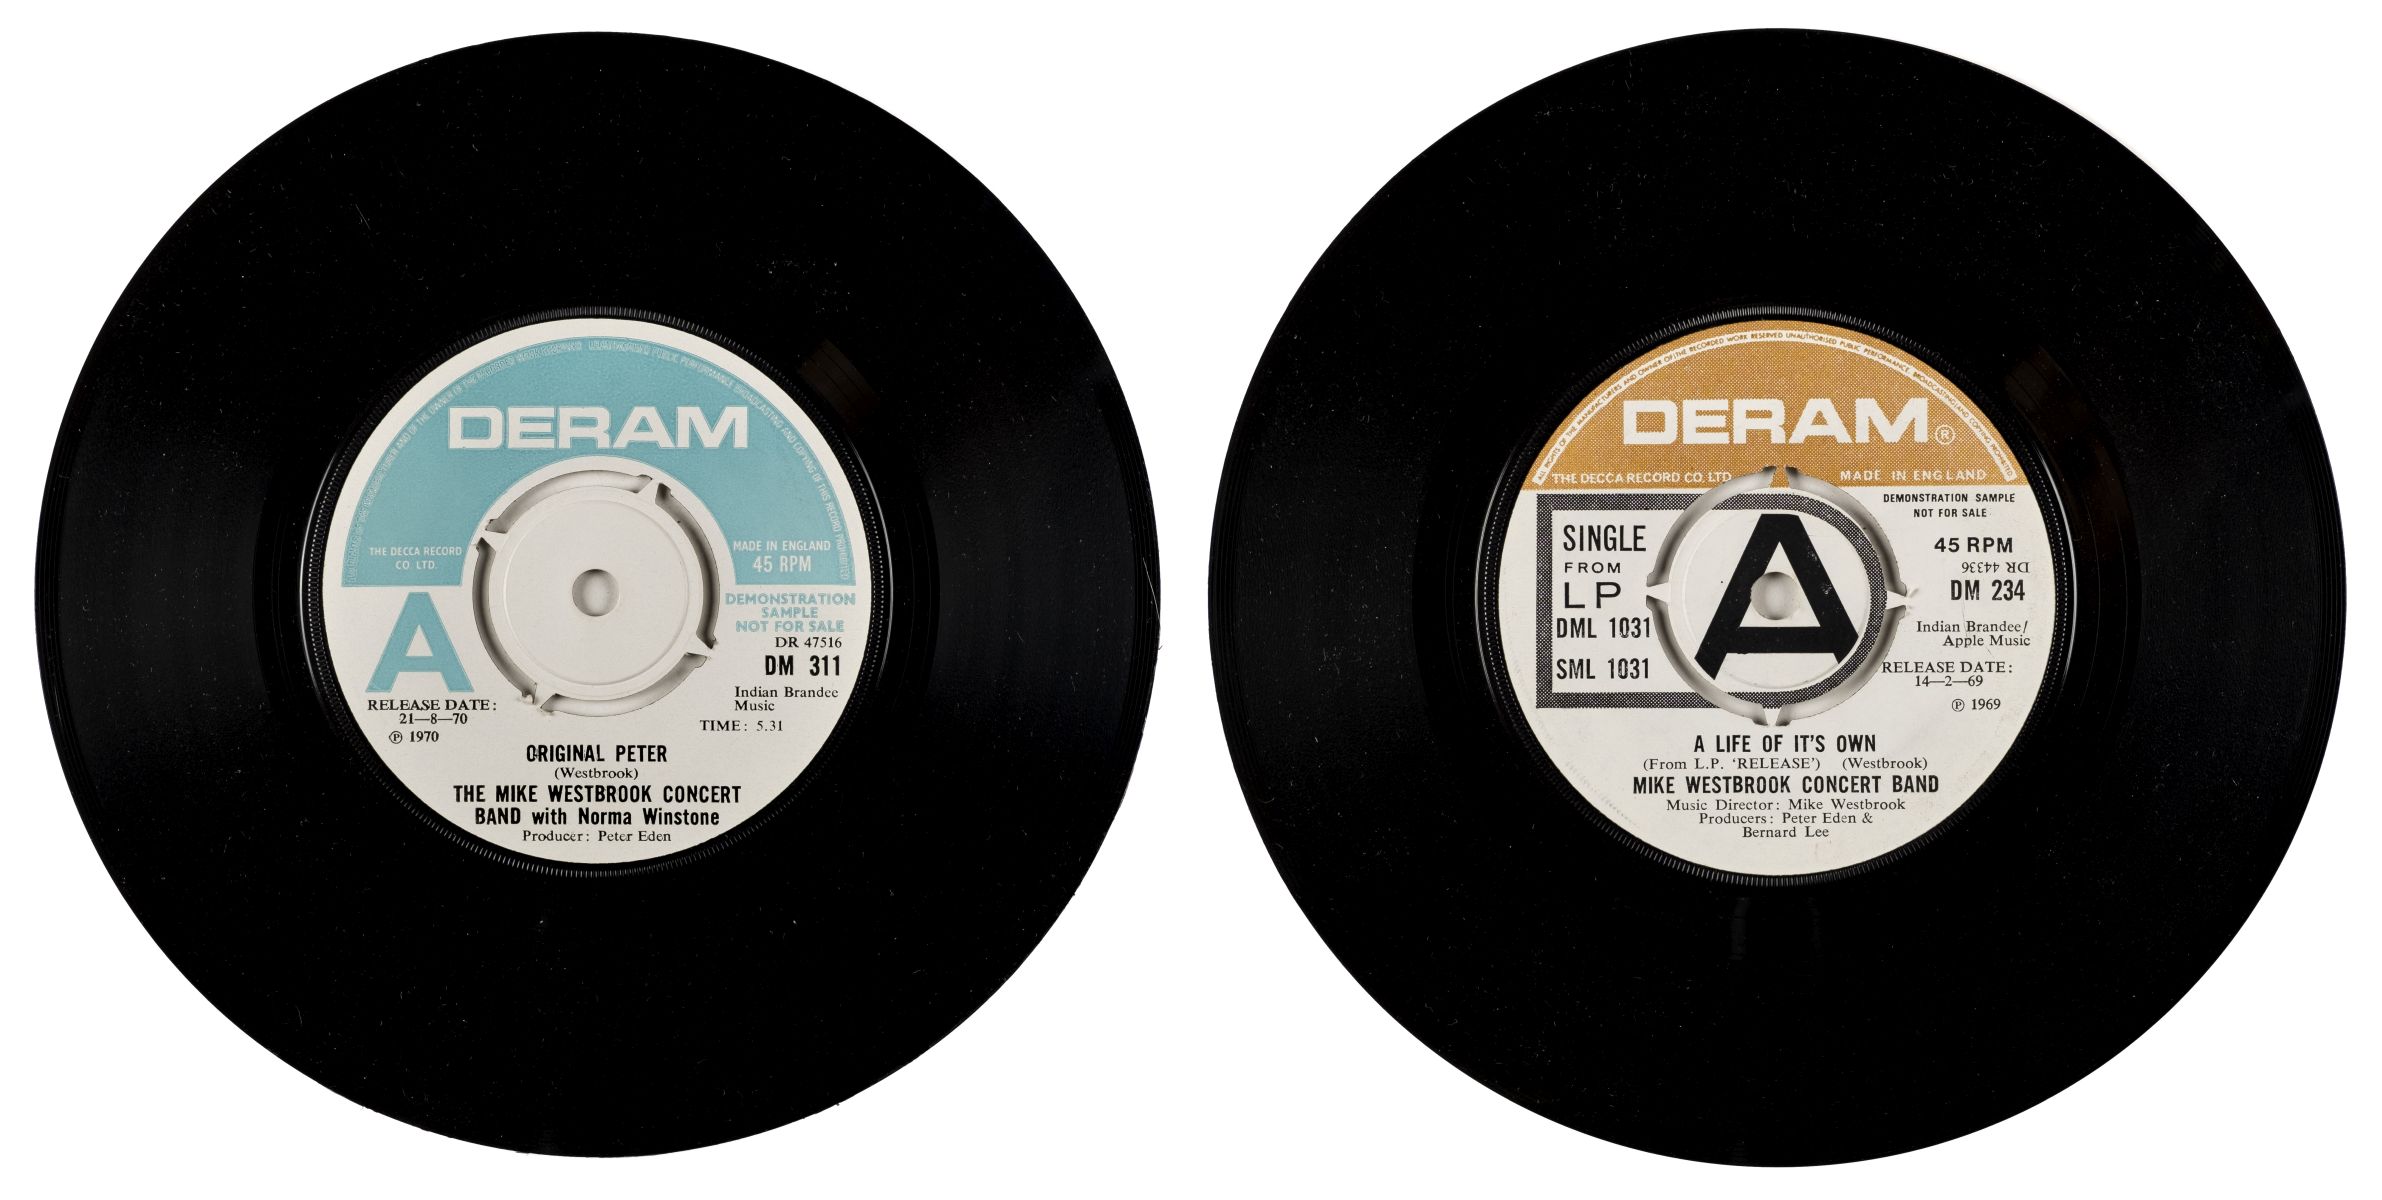 * Jazz. Pair of rare promo singles by The Mike Westbrook Concert Band (Deram, DM311 / DM234)